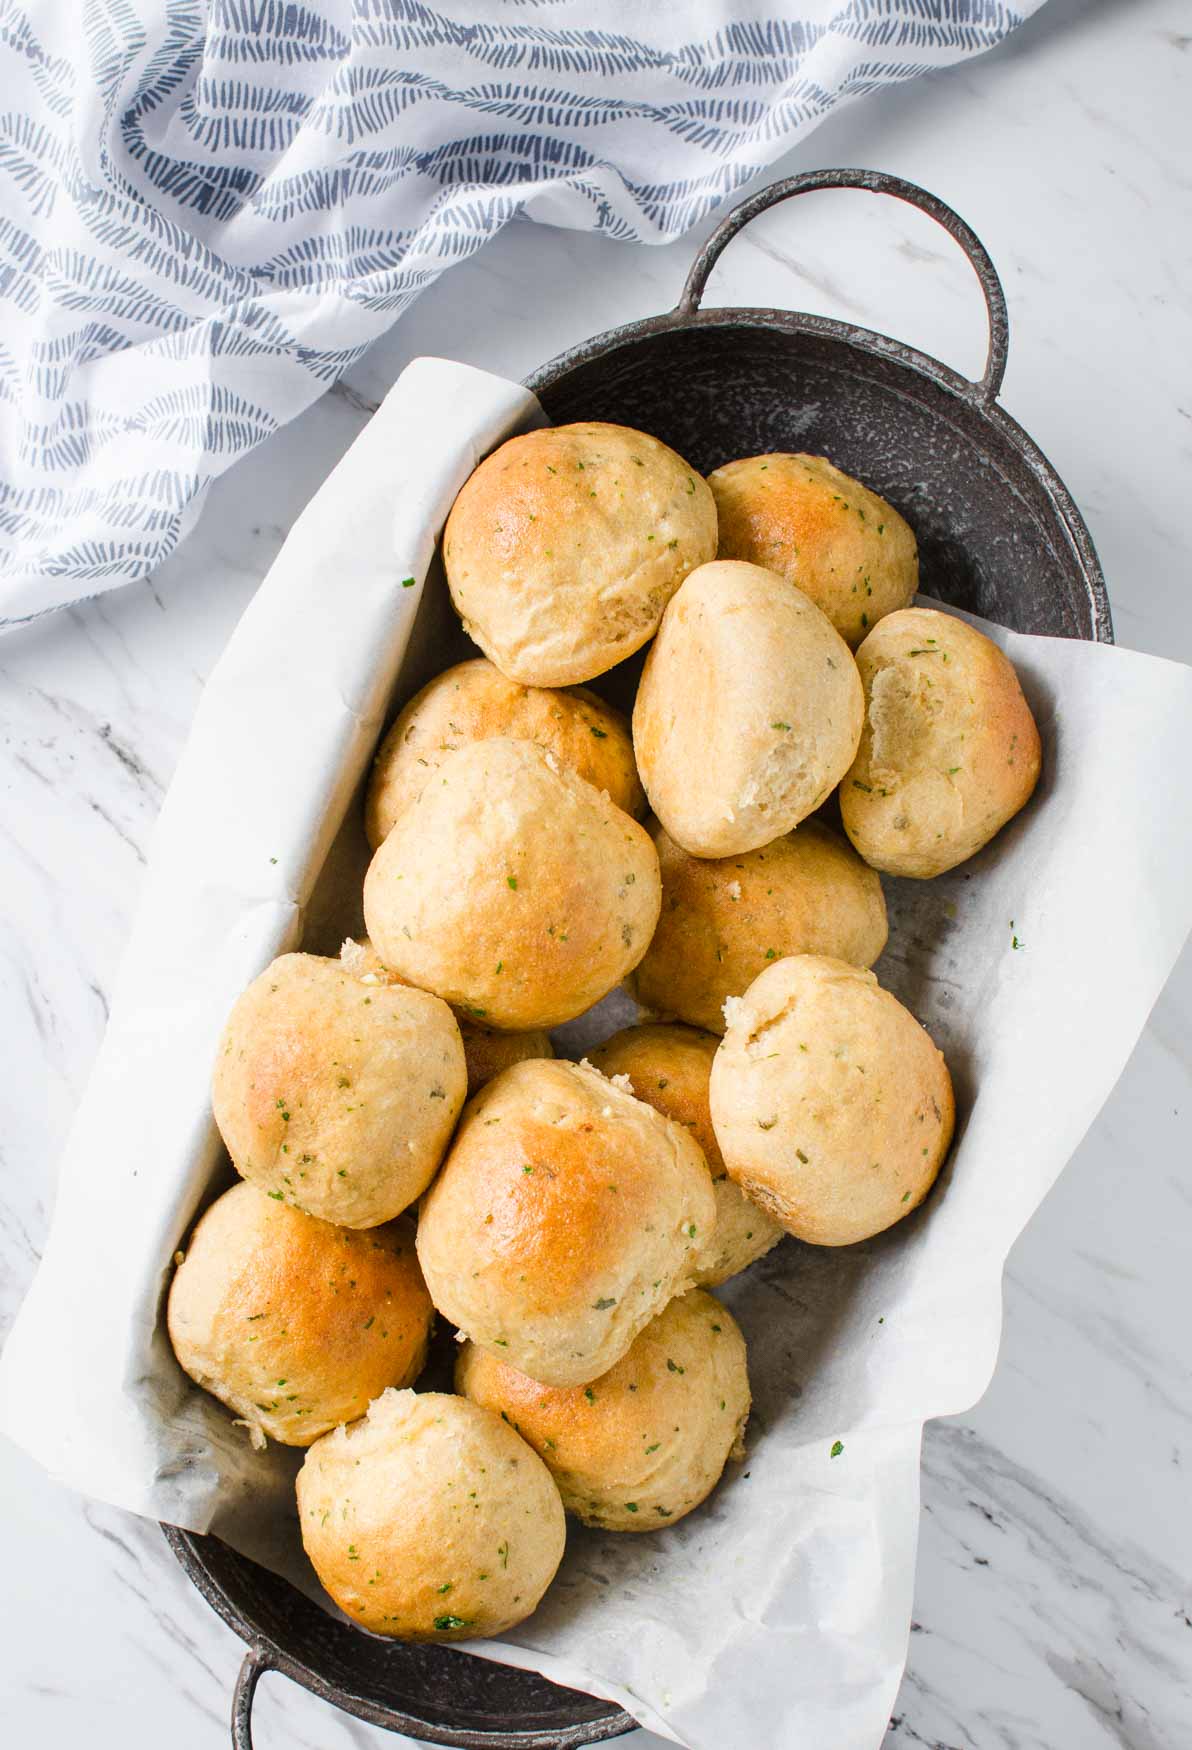 Healthy Whole Wheat Dinner Rolls - use this recipe to make easy, soft & fluffy dinner rolls at home. Add fresh garlic and herbs to give them an absolute taste. The best part is no one will ever believe that these are made from 100% whole wheat flour. | #watchwhatueat #dinnerrolls #wholewheat #wholewheatrolls #healthythanksgiving  